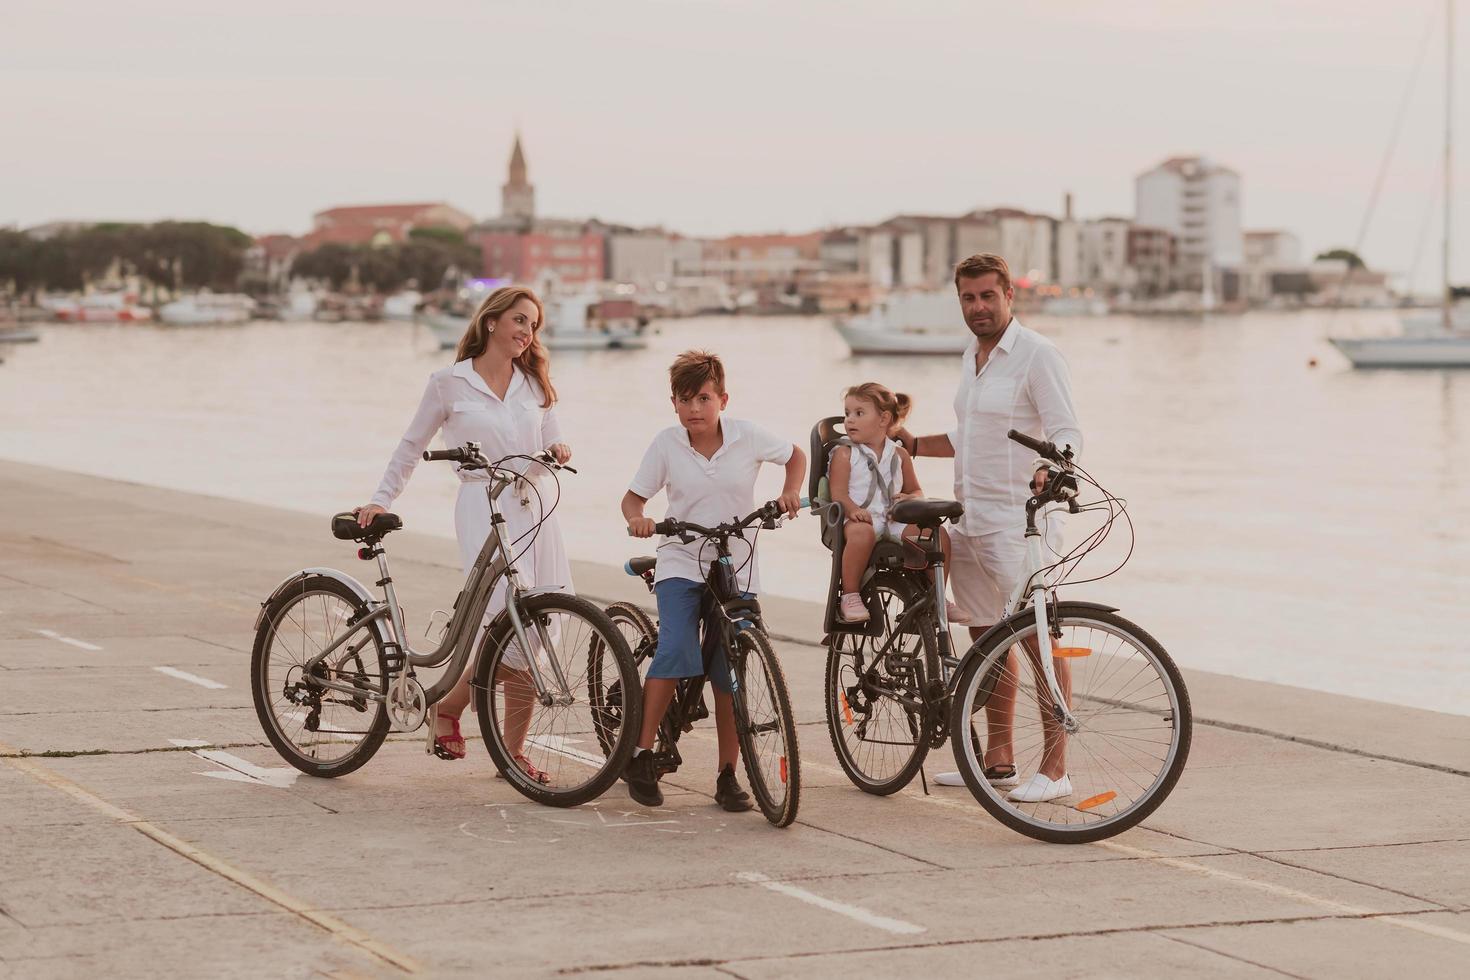 The happy family enjoys a beautiful morning by the sea riding a bike together and spending time together. The concept of a happy family photo